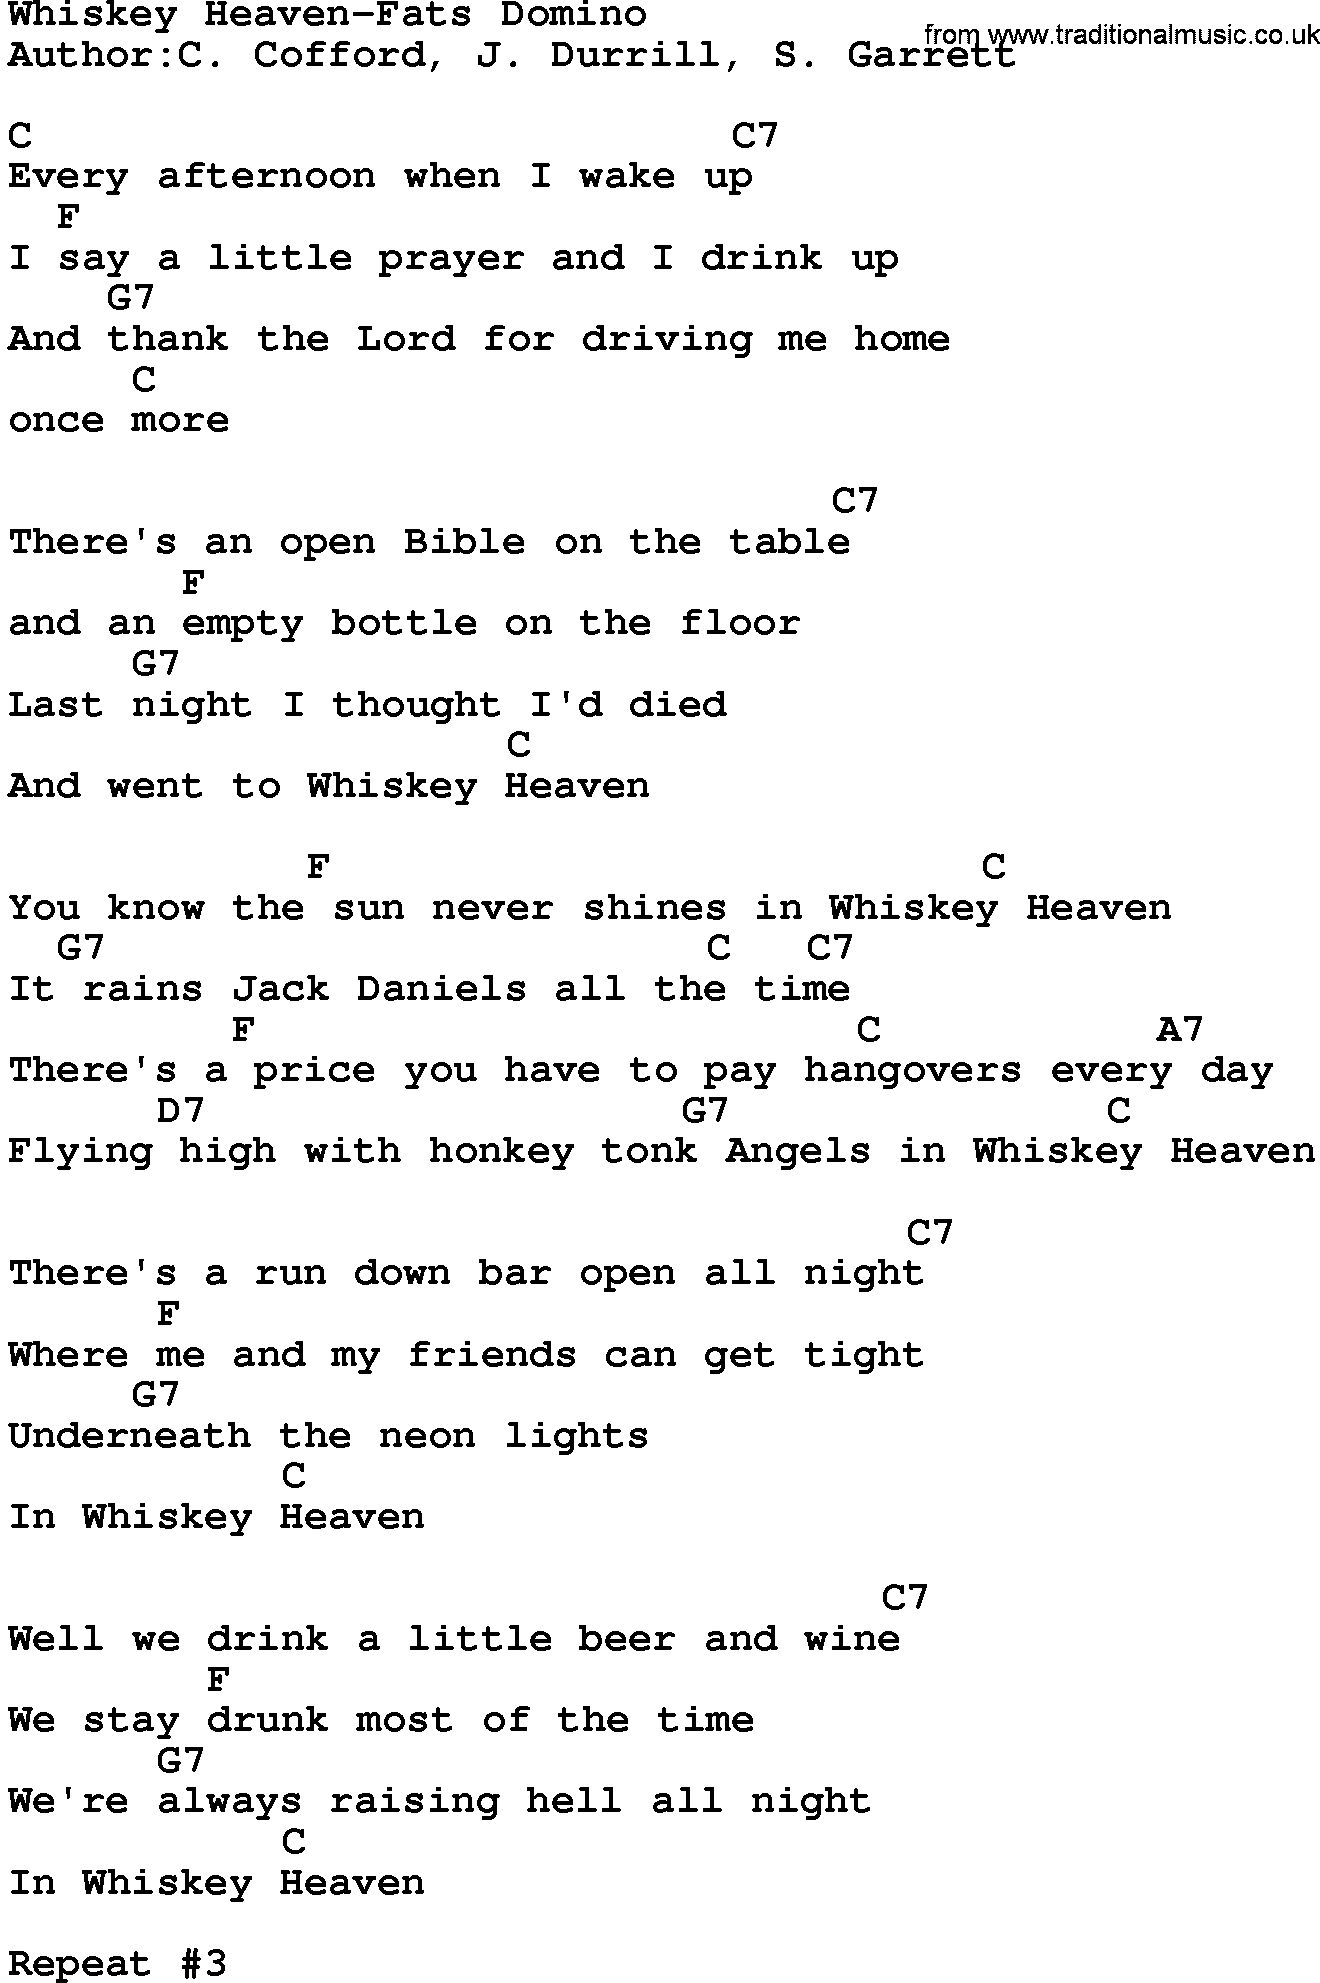 Country music song: Whiskey Heaven-Fats Domino lyrics and chords